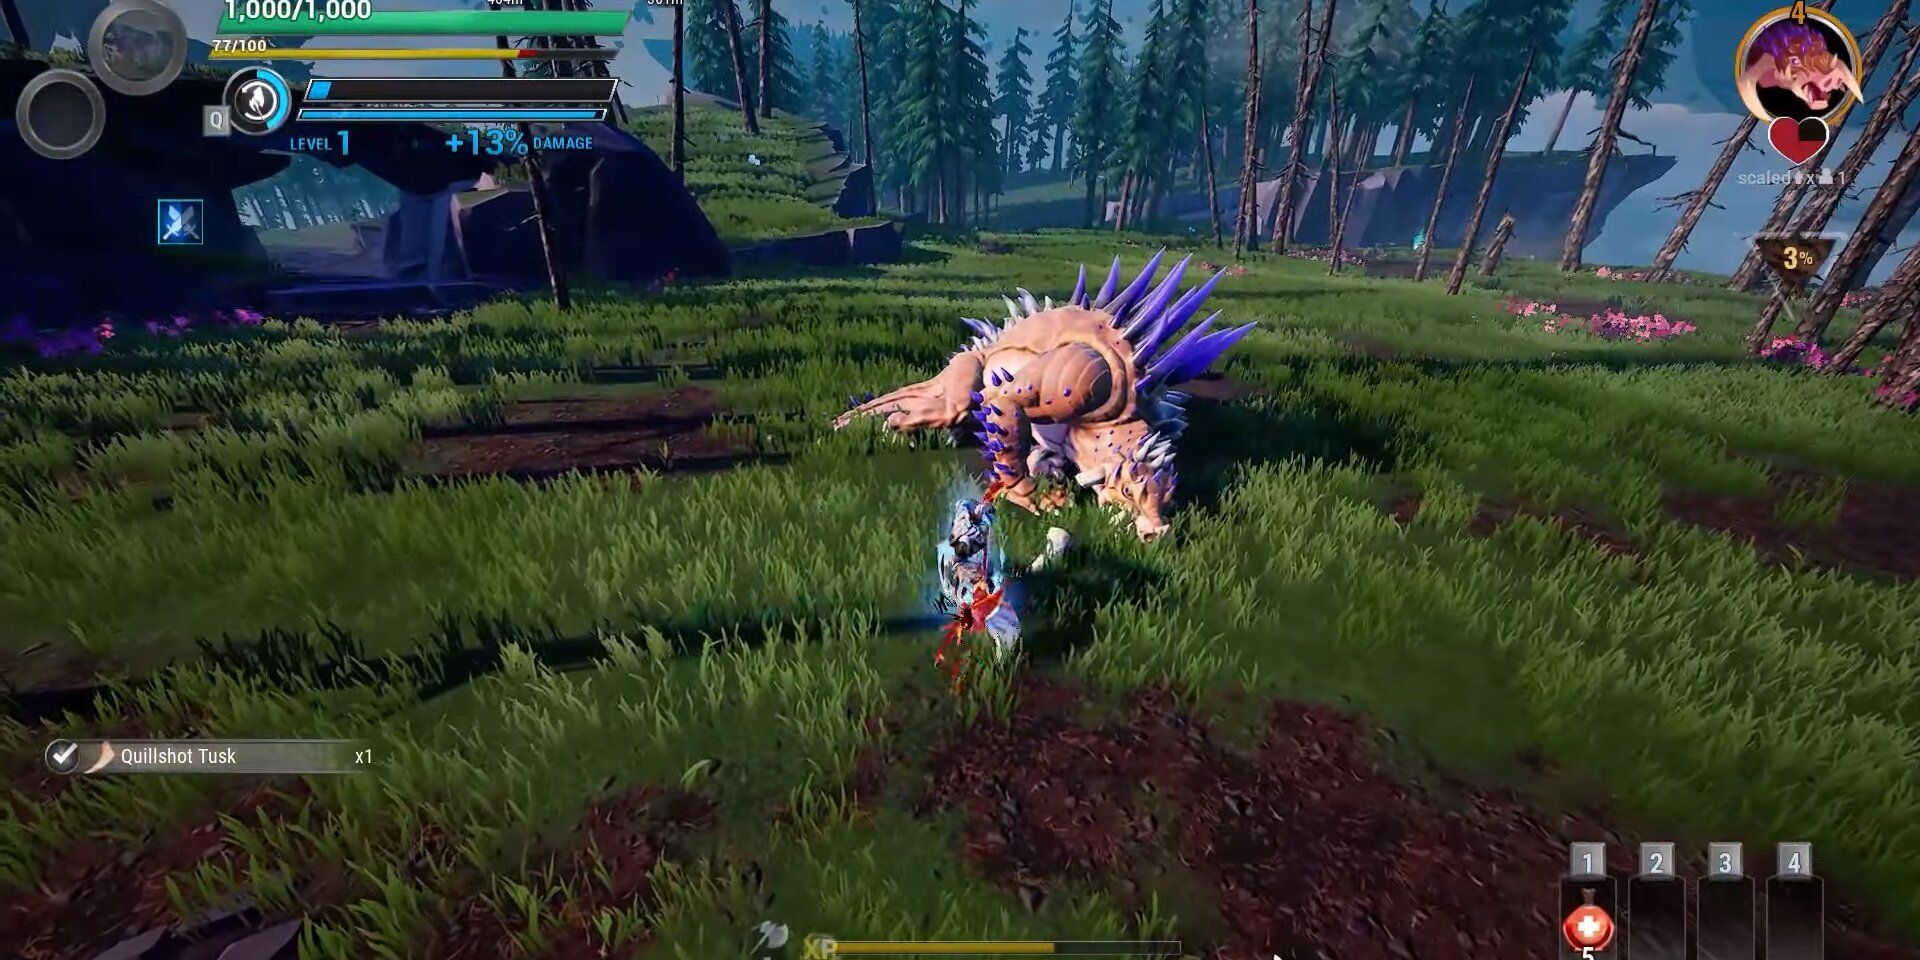 Image of gameplay of a battle from the game Dauntless.